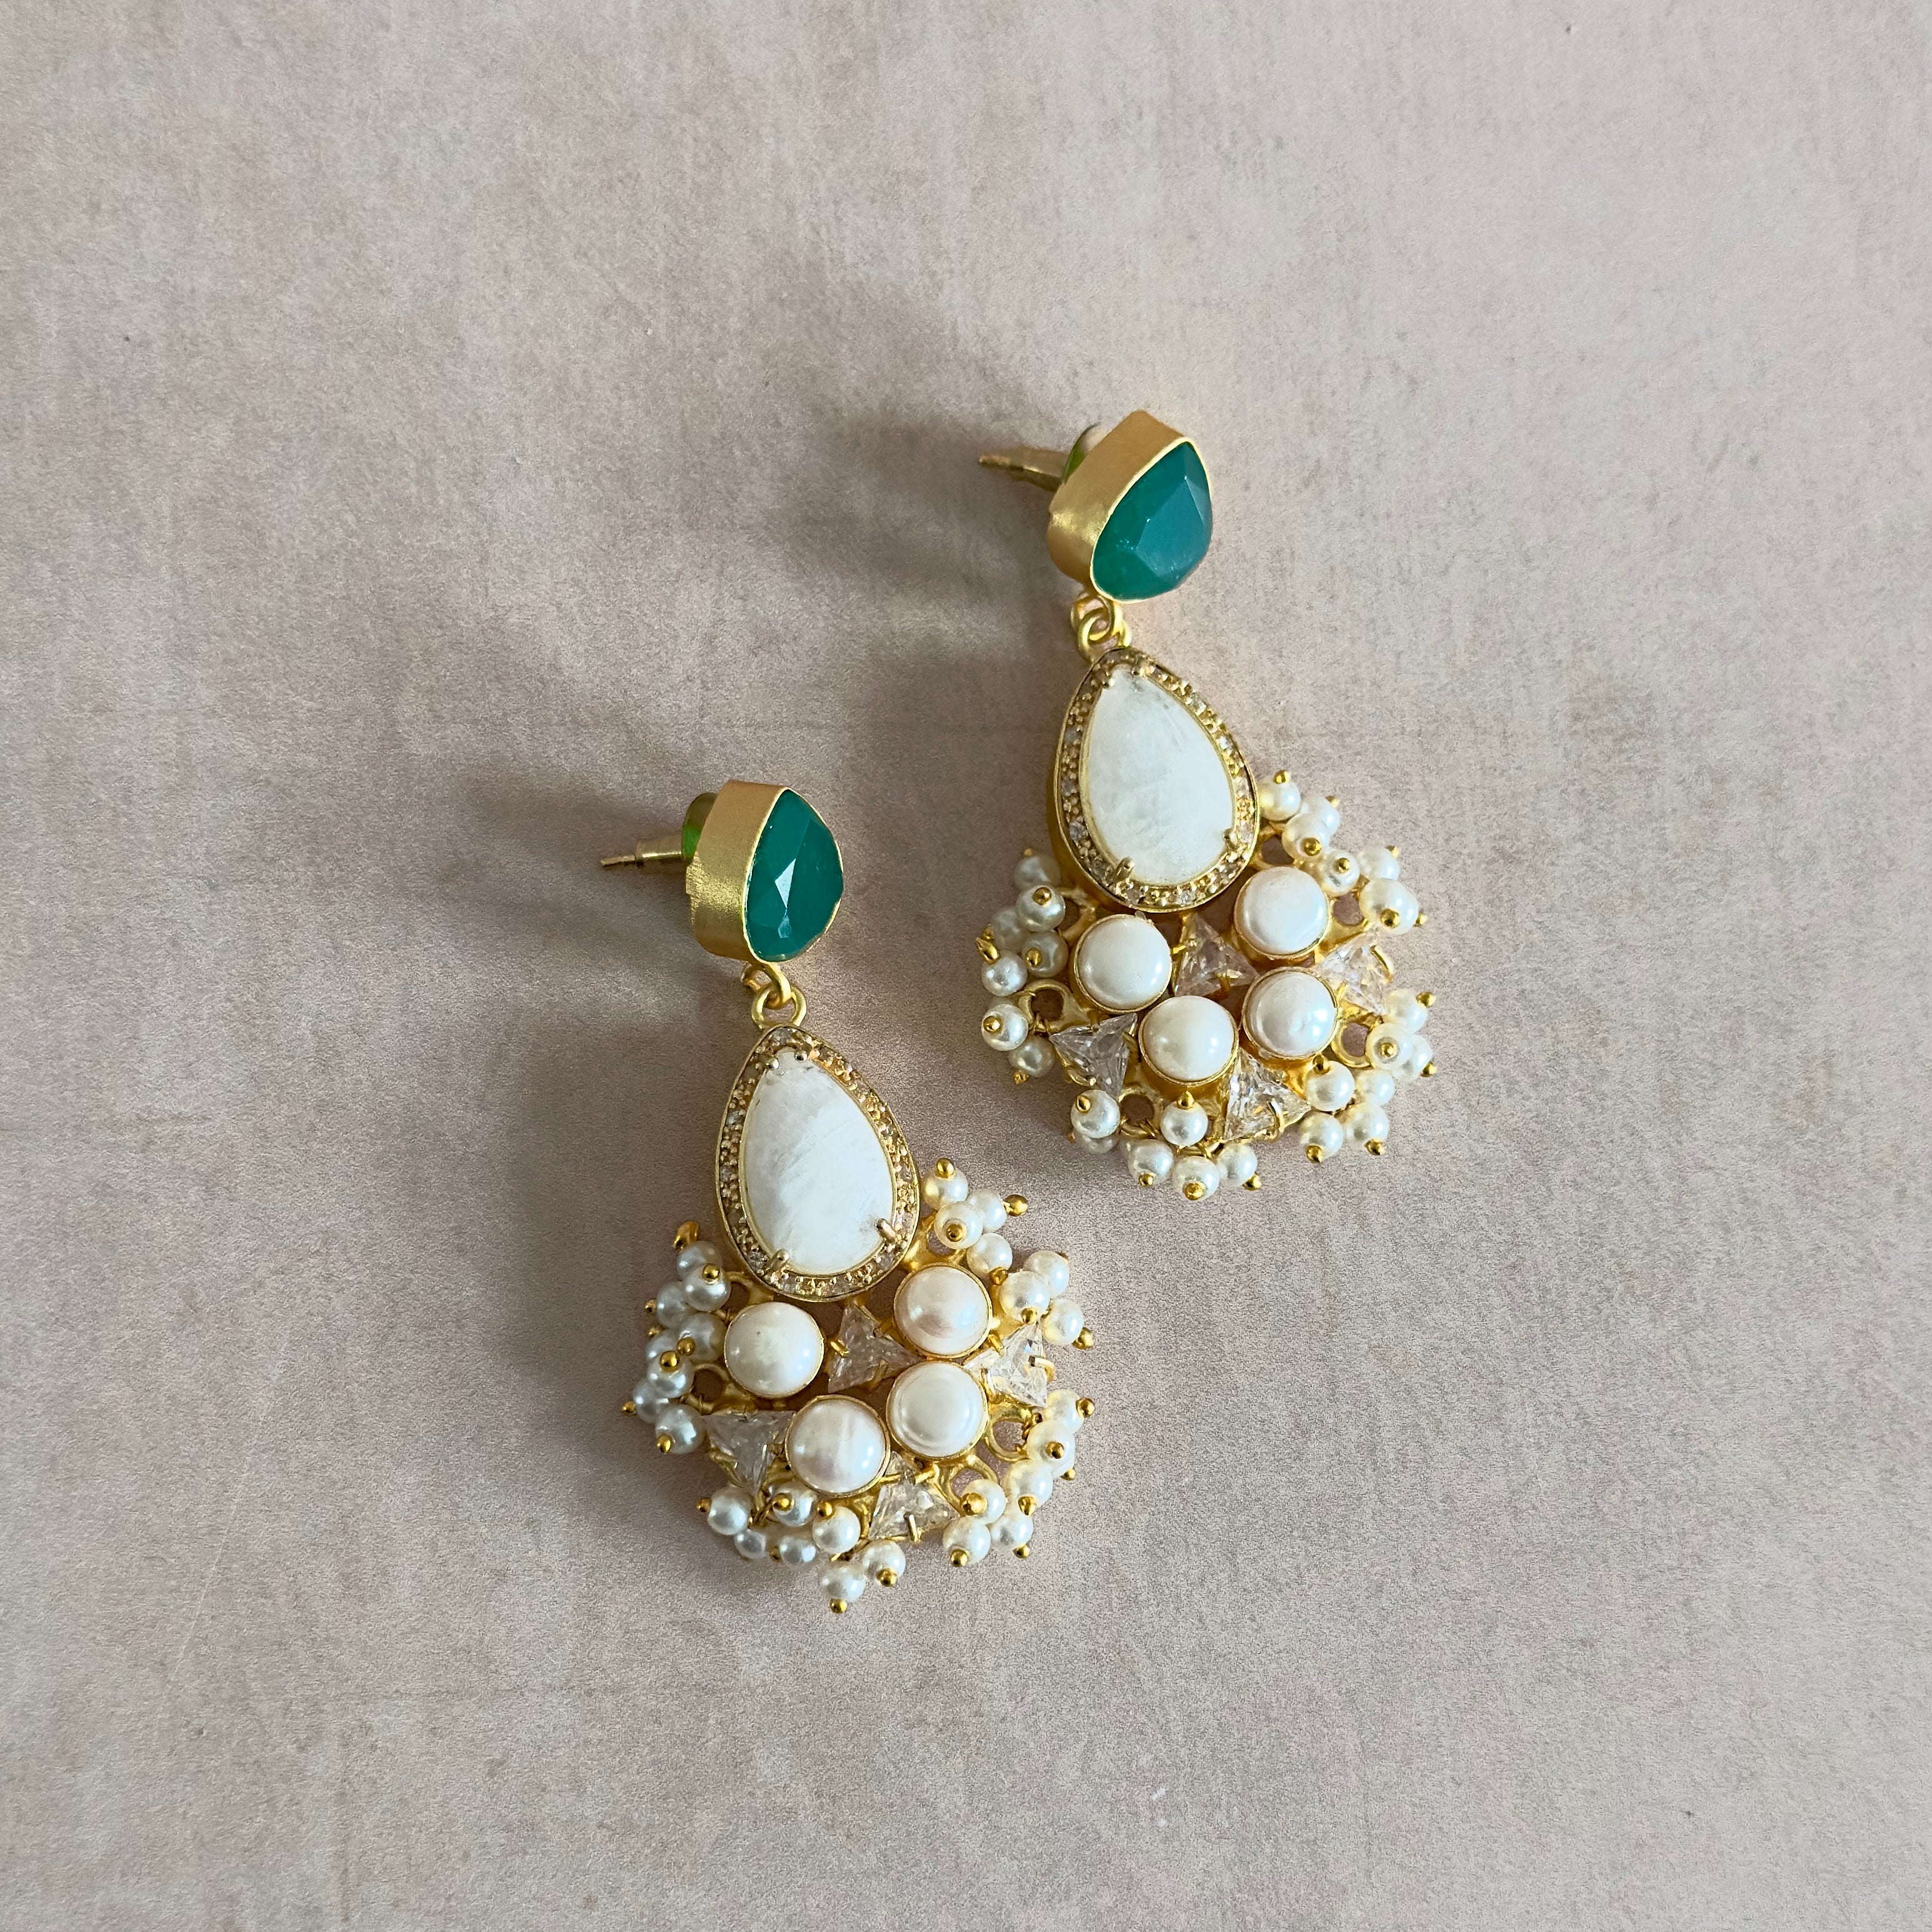 Elevate your look with the Romee Green Drop Earrings! The stunning hues of green and pearl complemented by white quartz crystals exude a sense of elegance and luxury. Add a touch of sophistication to any outfit and make a statement wherever you go. Get ready to turn heads and feel confident in these beautiful earrings!